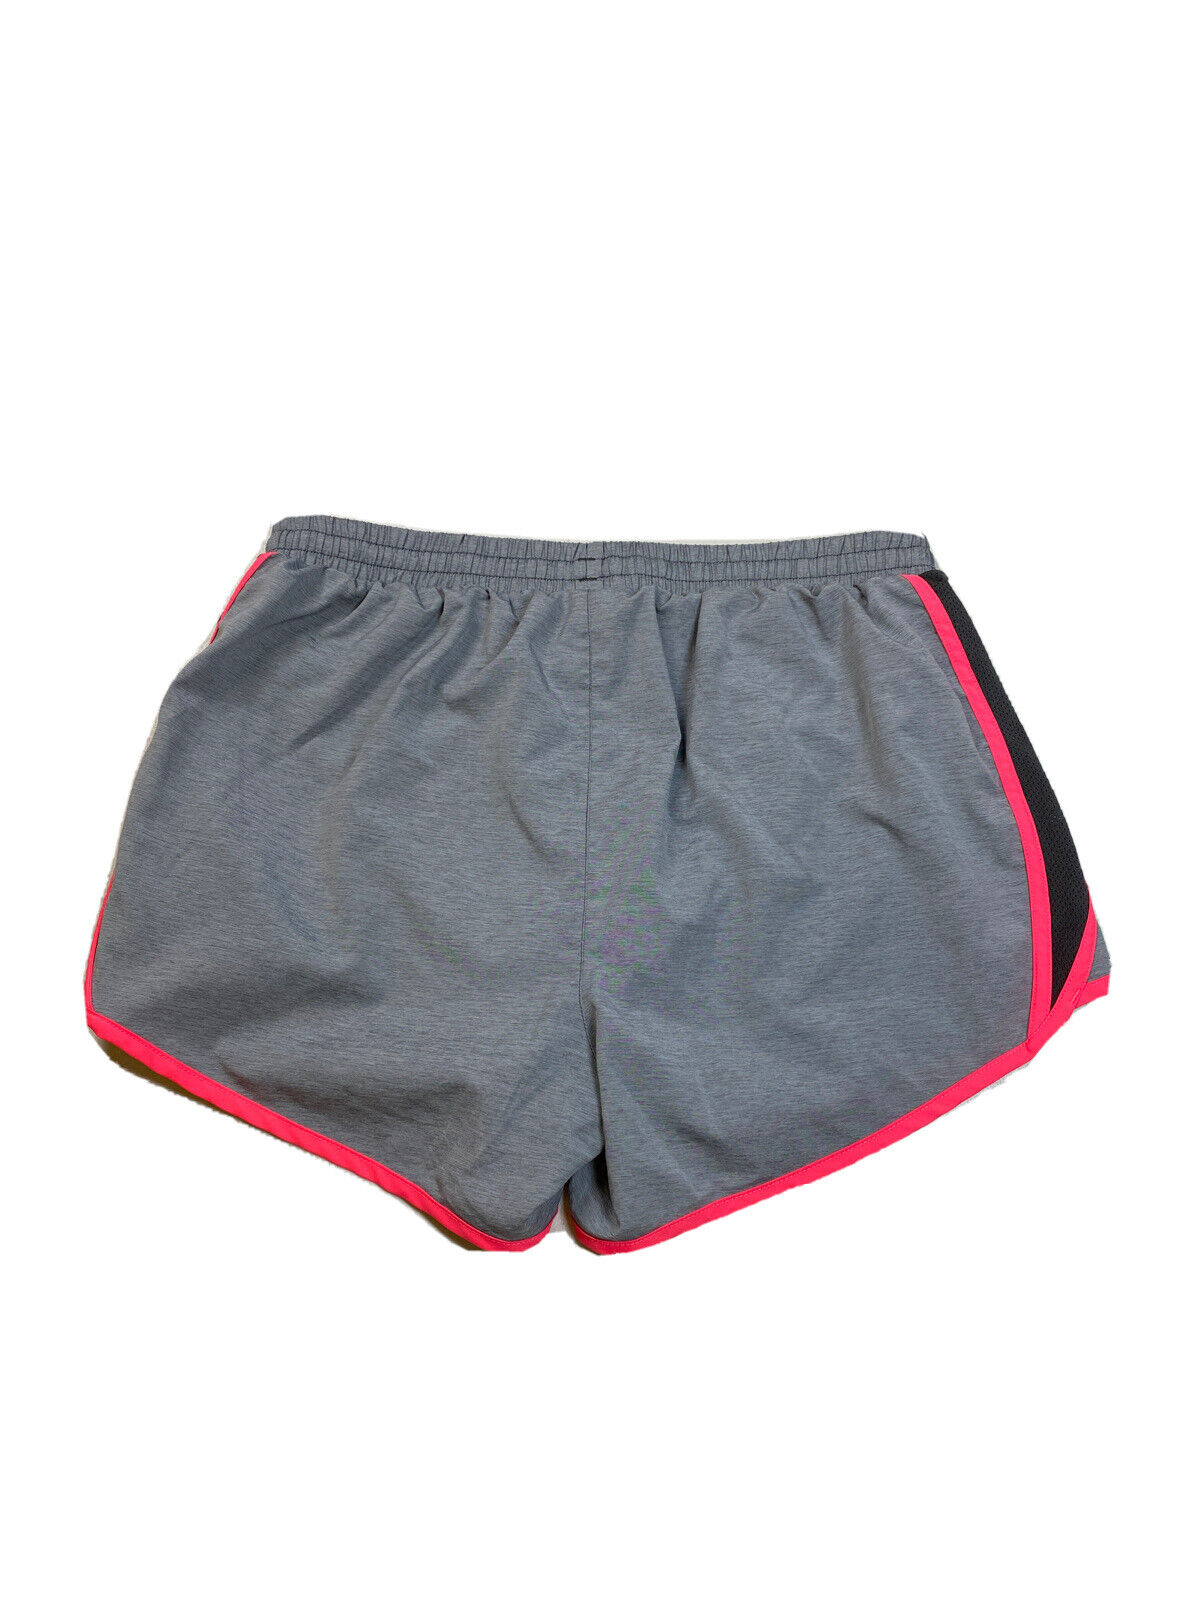 Under Armour Women's Gray/Pink Speed Stride Lined Athletic Shorts - M